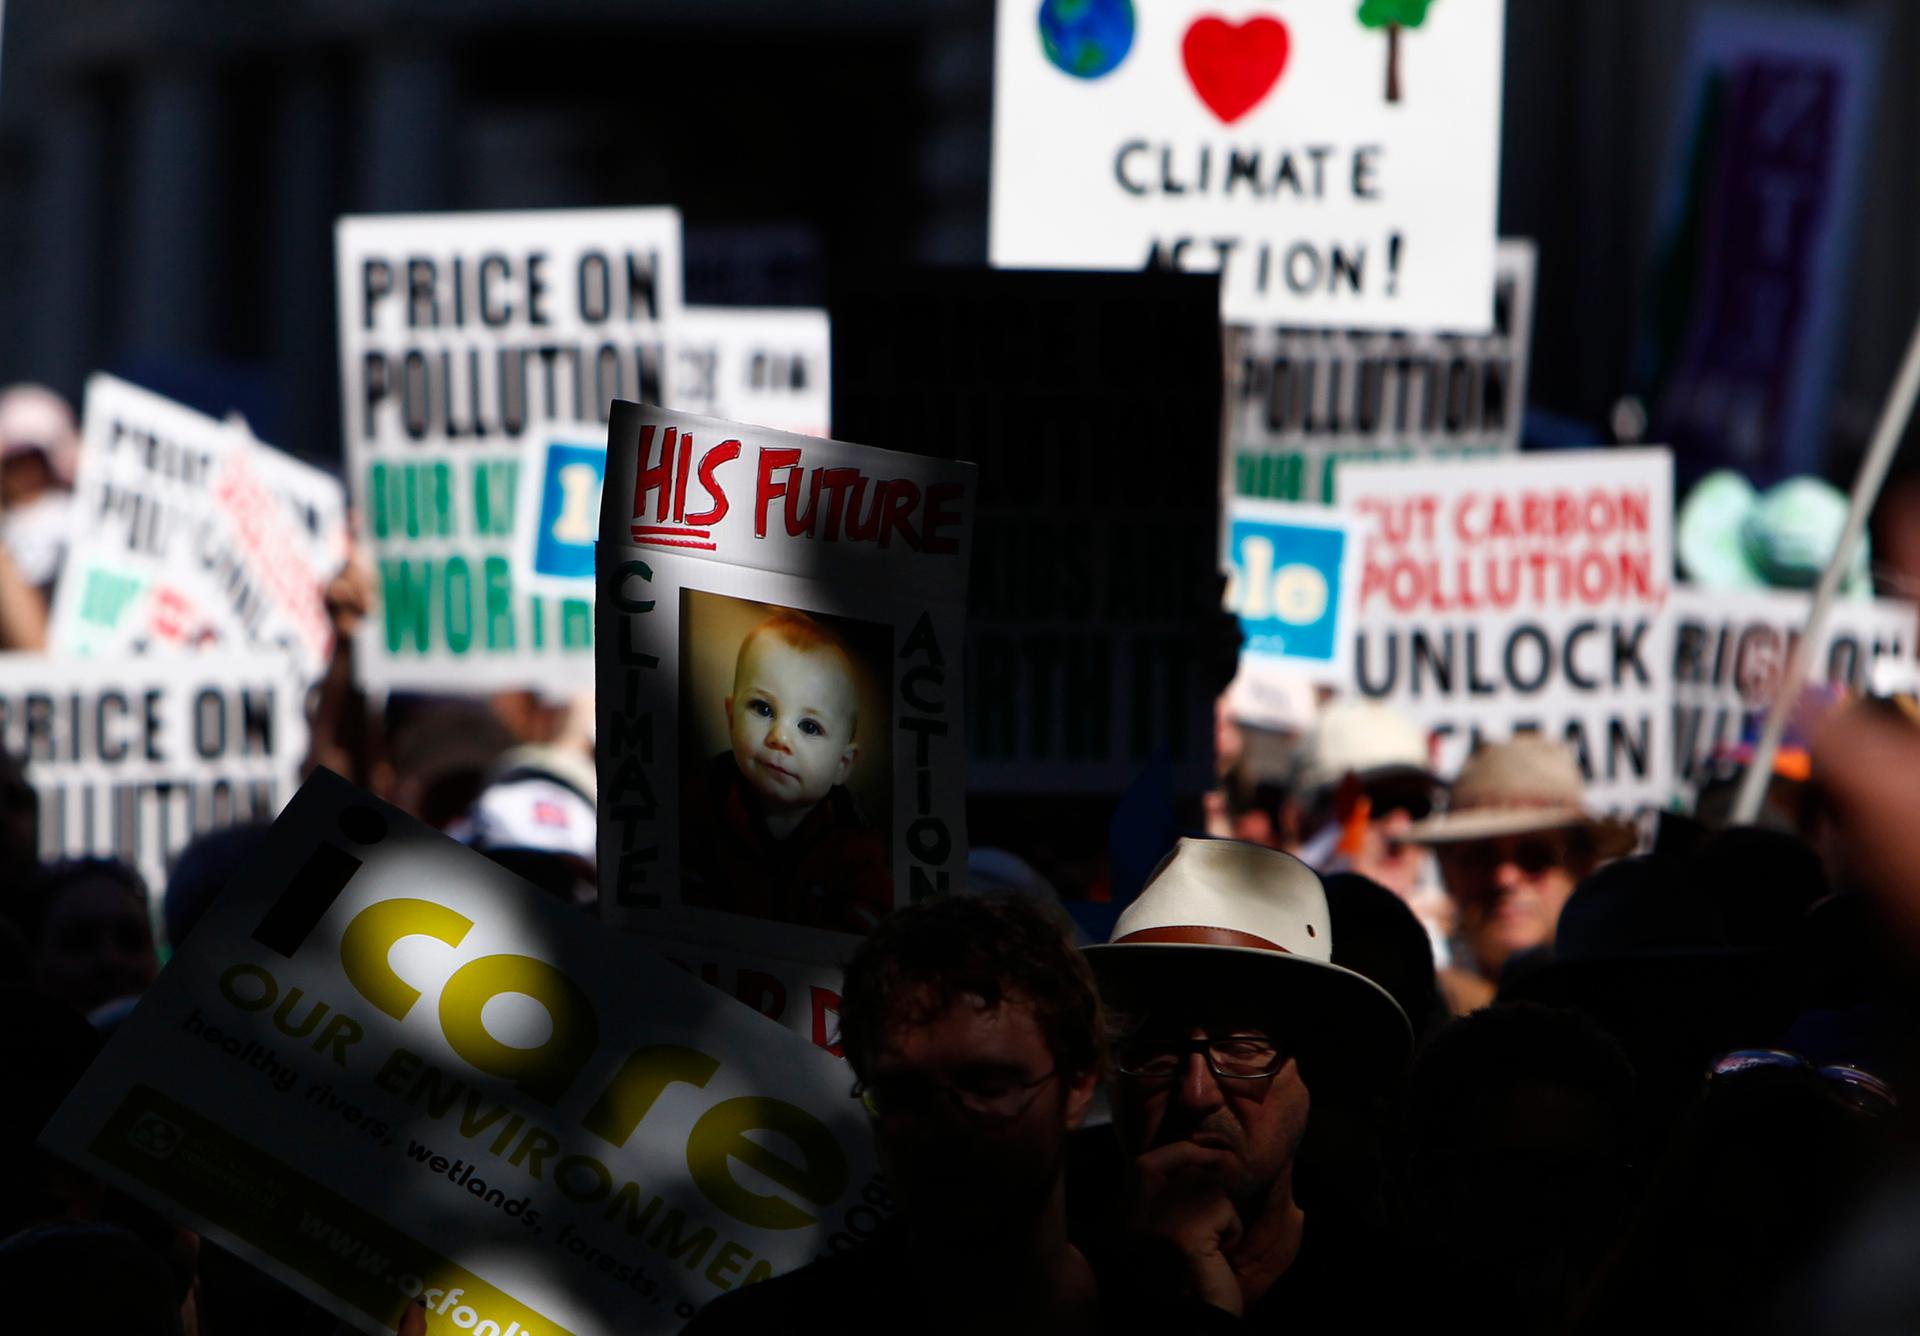 Protesters carrying placards attend a rally in favor of taxing carbon emissions in Melbourne, Australia, on March 12, 2011.